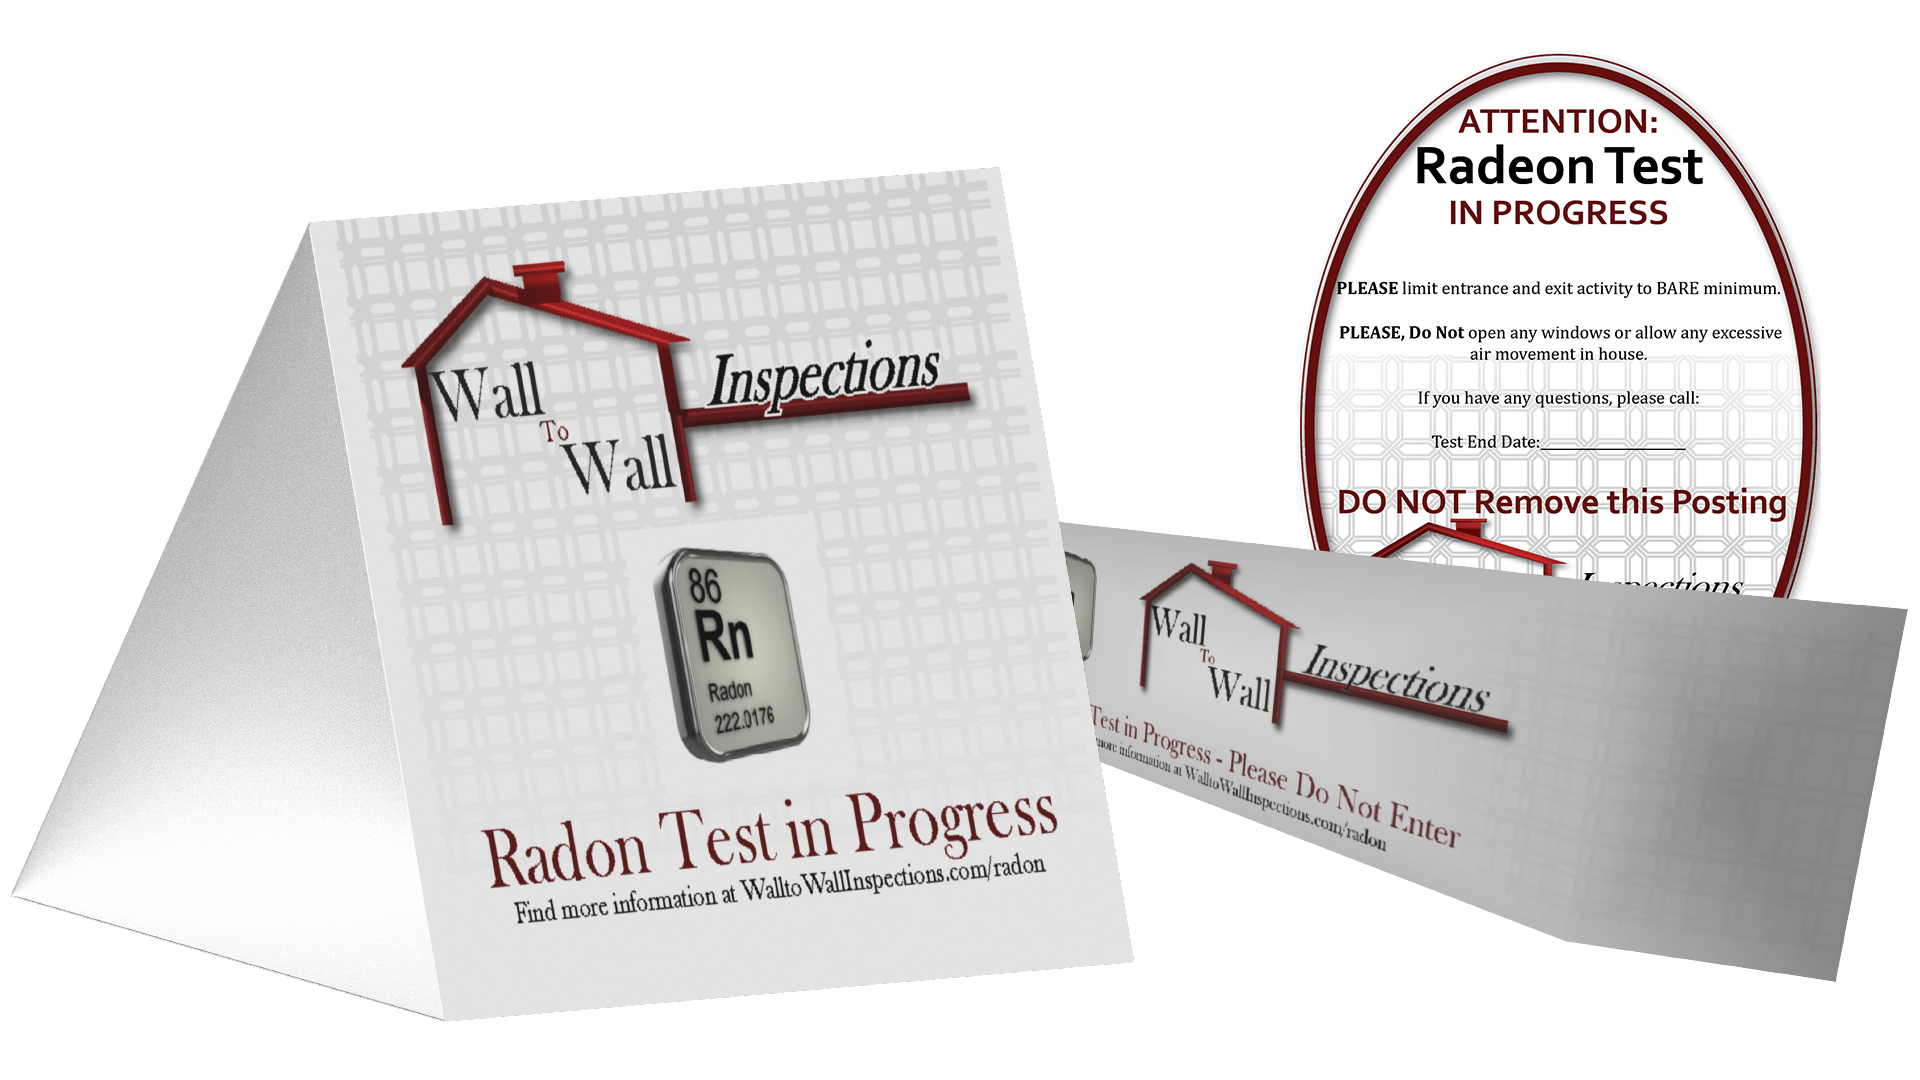 This image showcases a set of informational signage elements created for Wall to Wall Inspections. It includes a table tent, a door strip insert, and a sticker. All three items display a similar message, indicating that a radon test is in progress and the door should remain closed. This ensures clear communication and safety precautions during inspections.